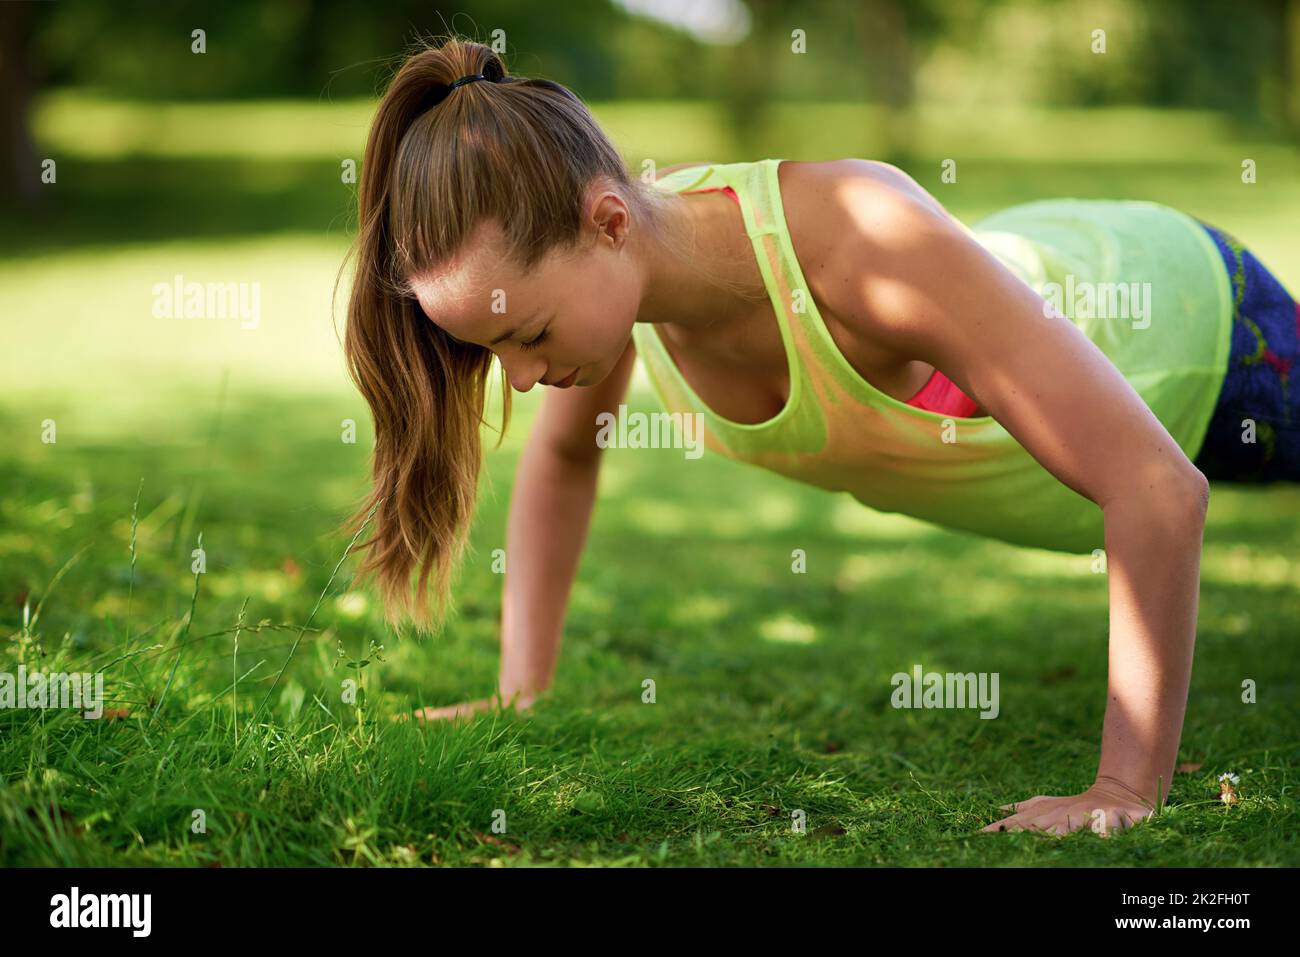 Dedicate yourself. Shot of a young woman doing push-ups on a grassy field. Stock Photo